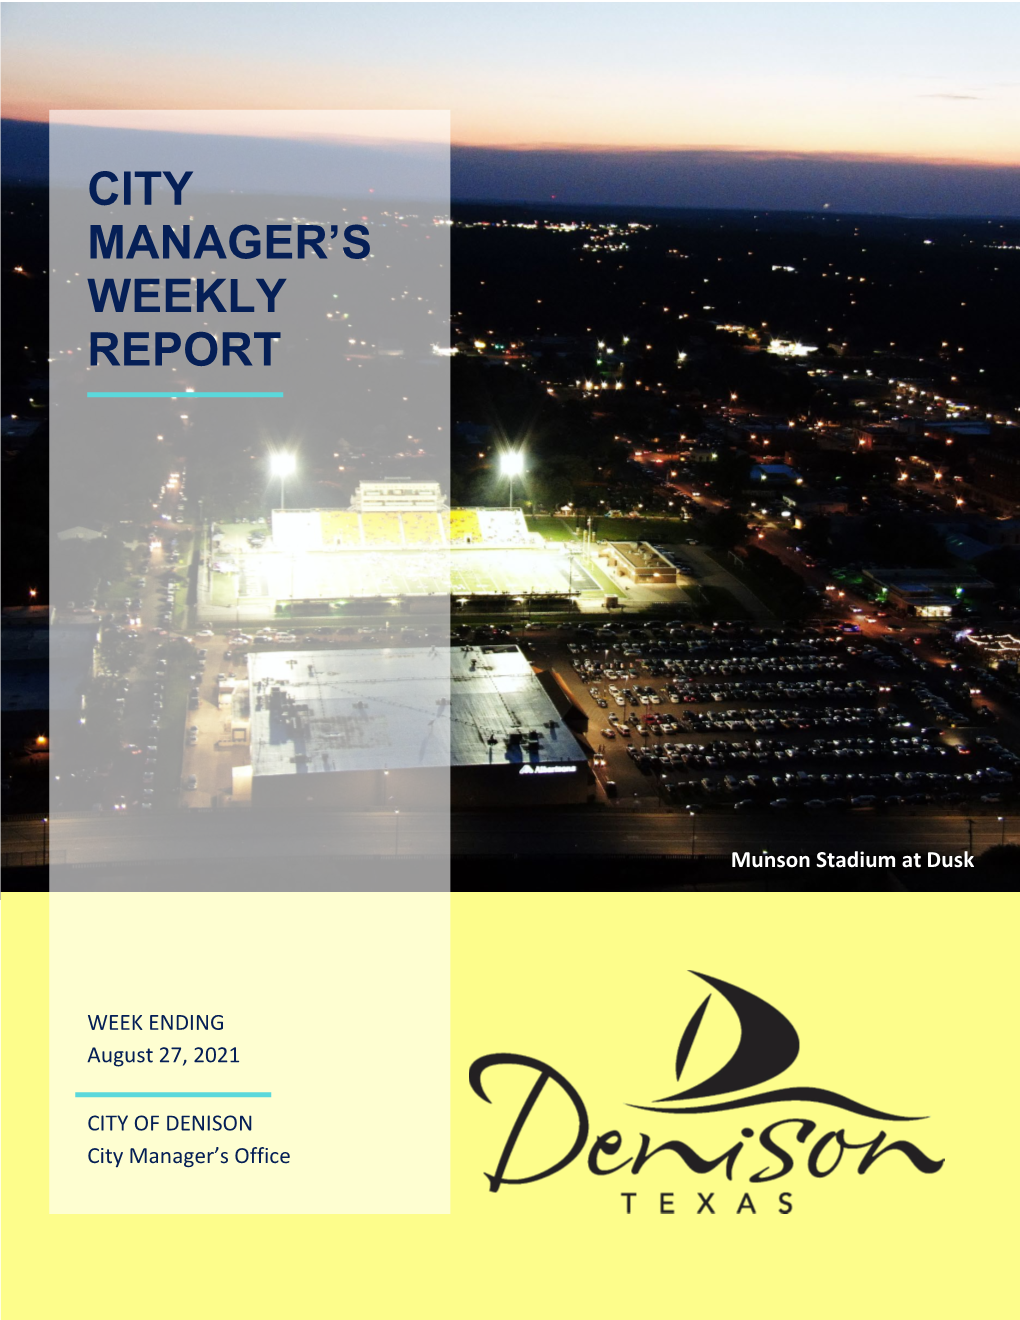 City Manager's Weekly Report